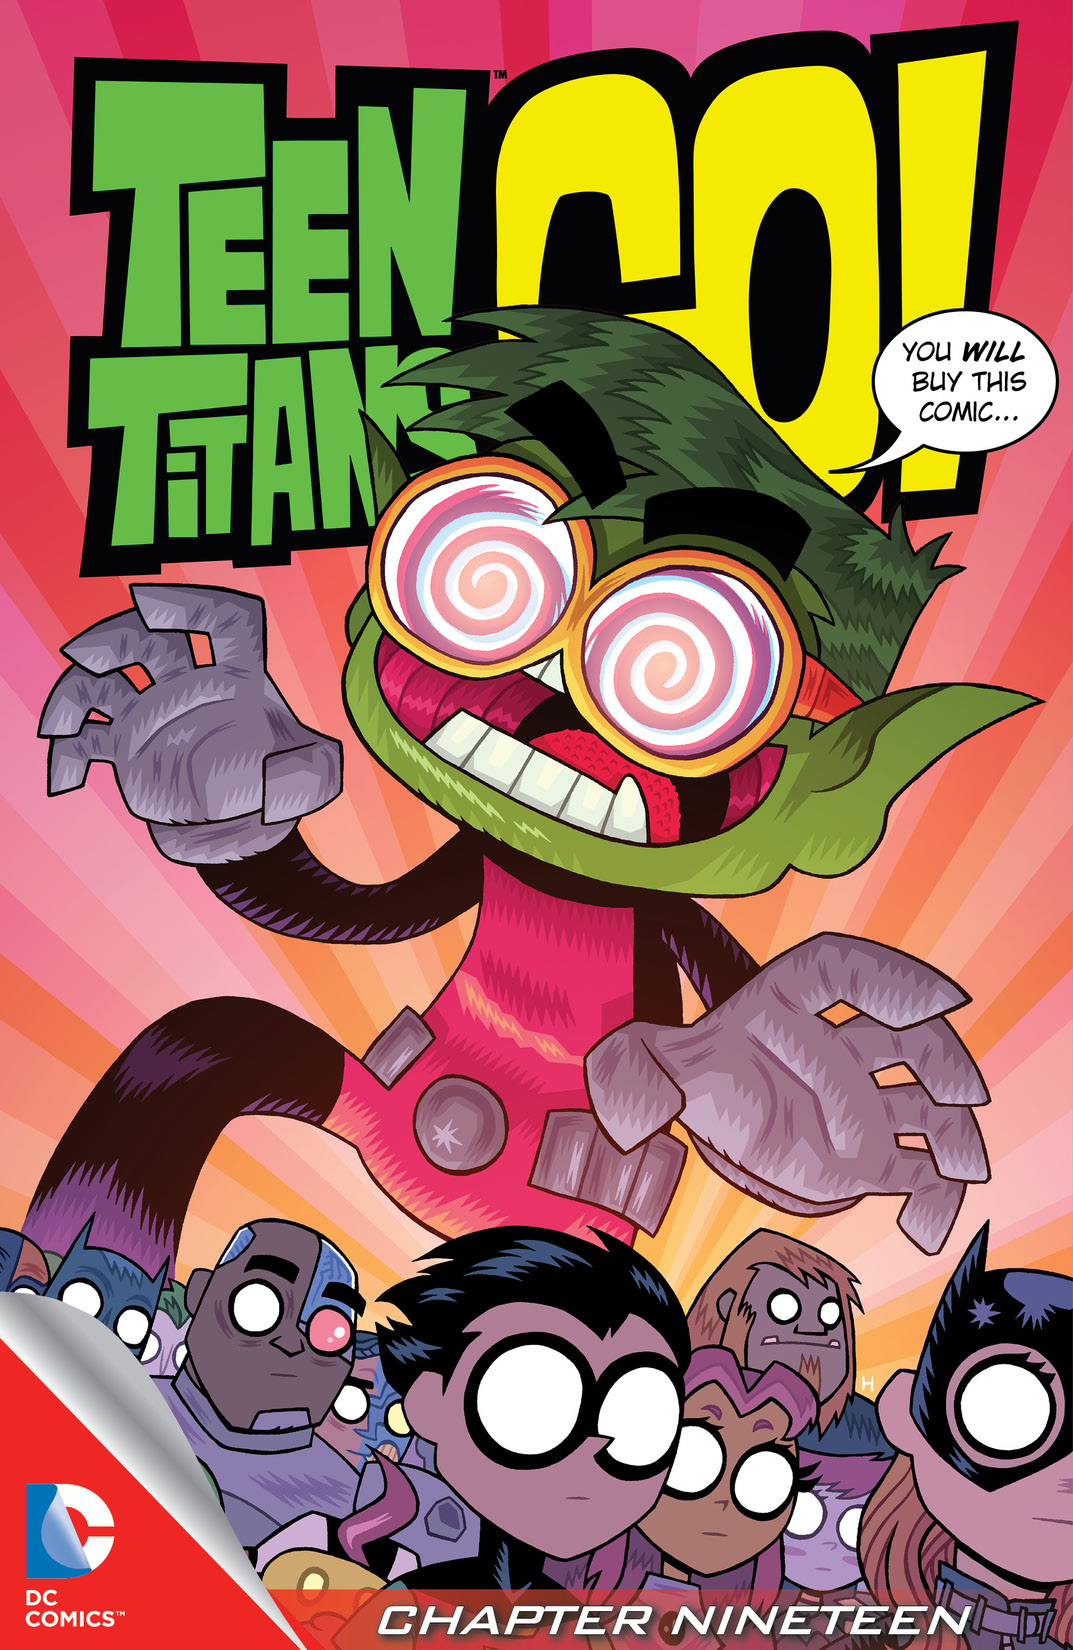 Teen Titans Go! (2013-) #19 preview images